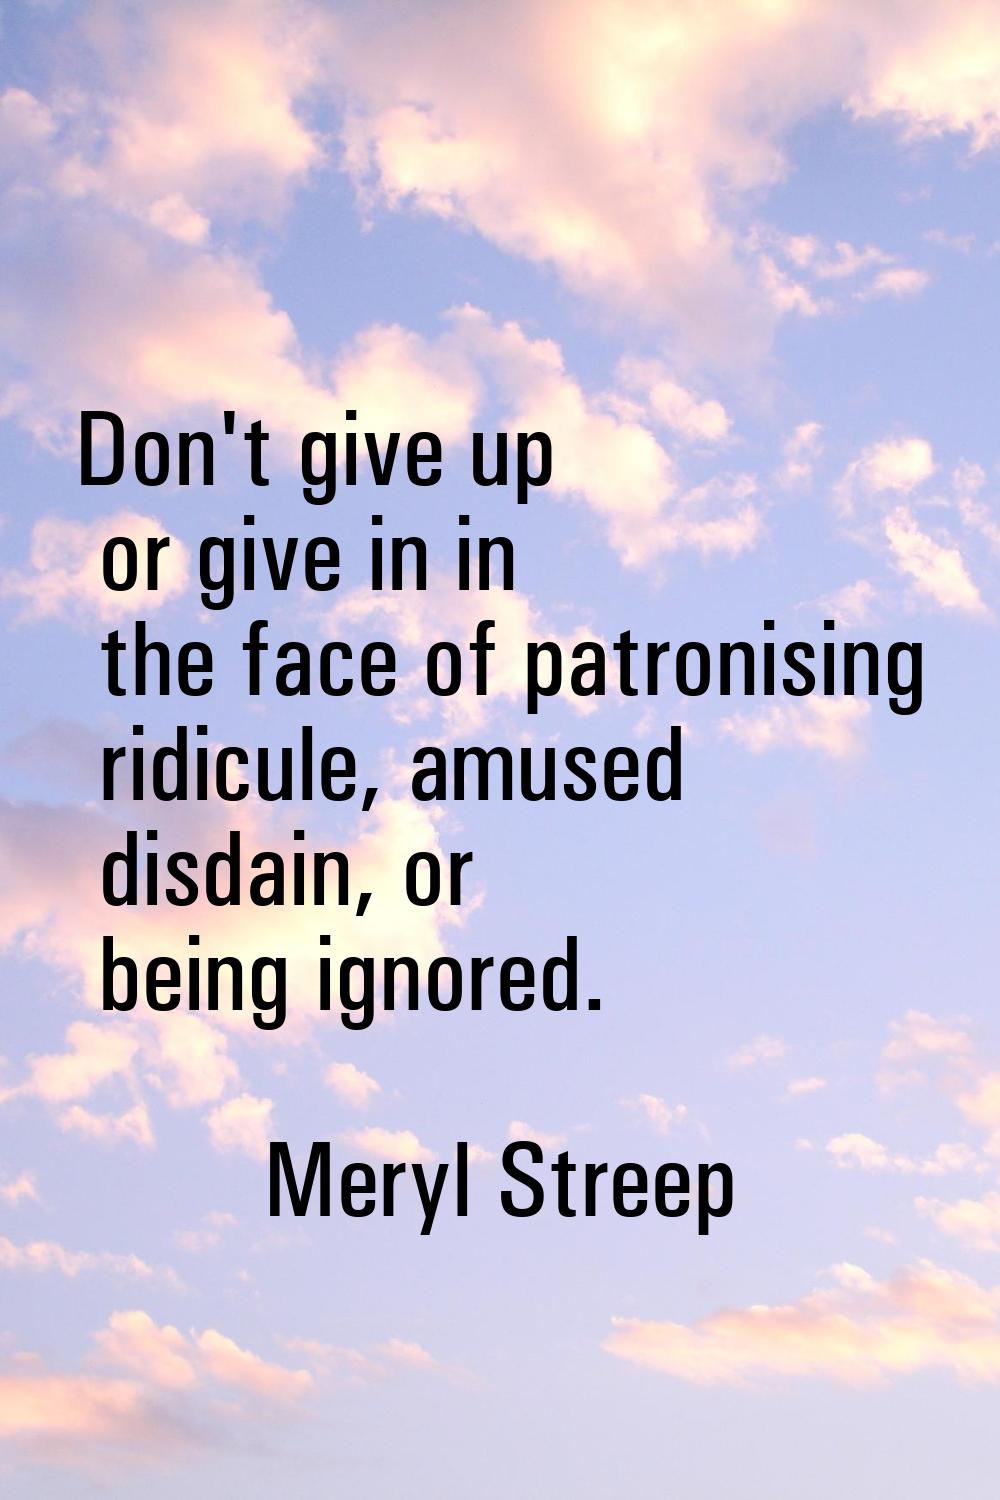 Don't give up or give in in the face of patronising ridicule, amused disdain, or being ignored.